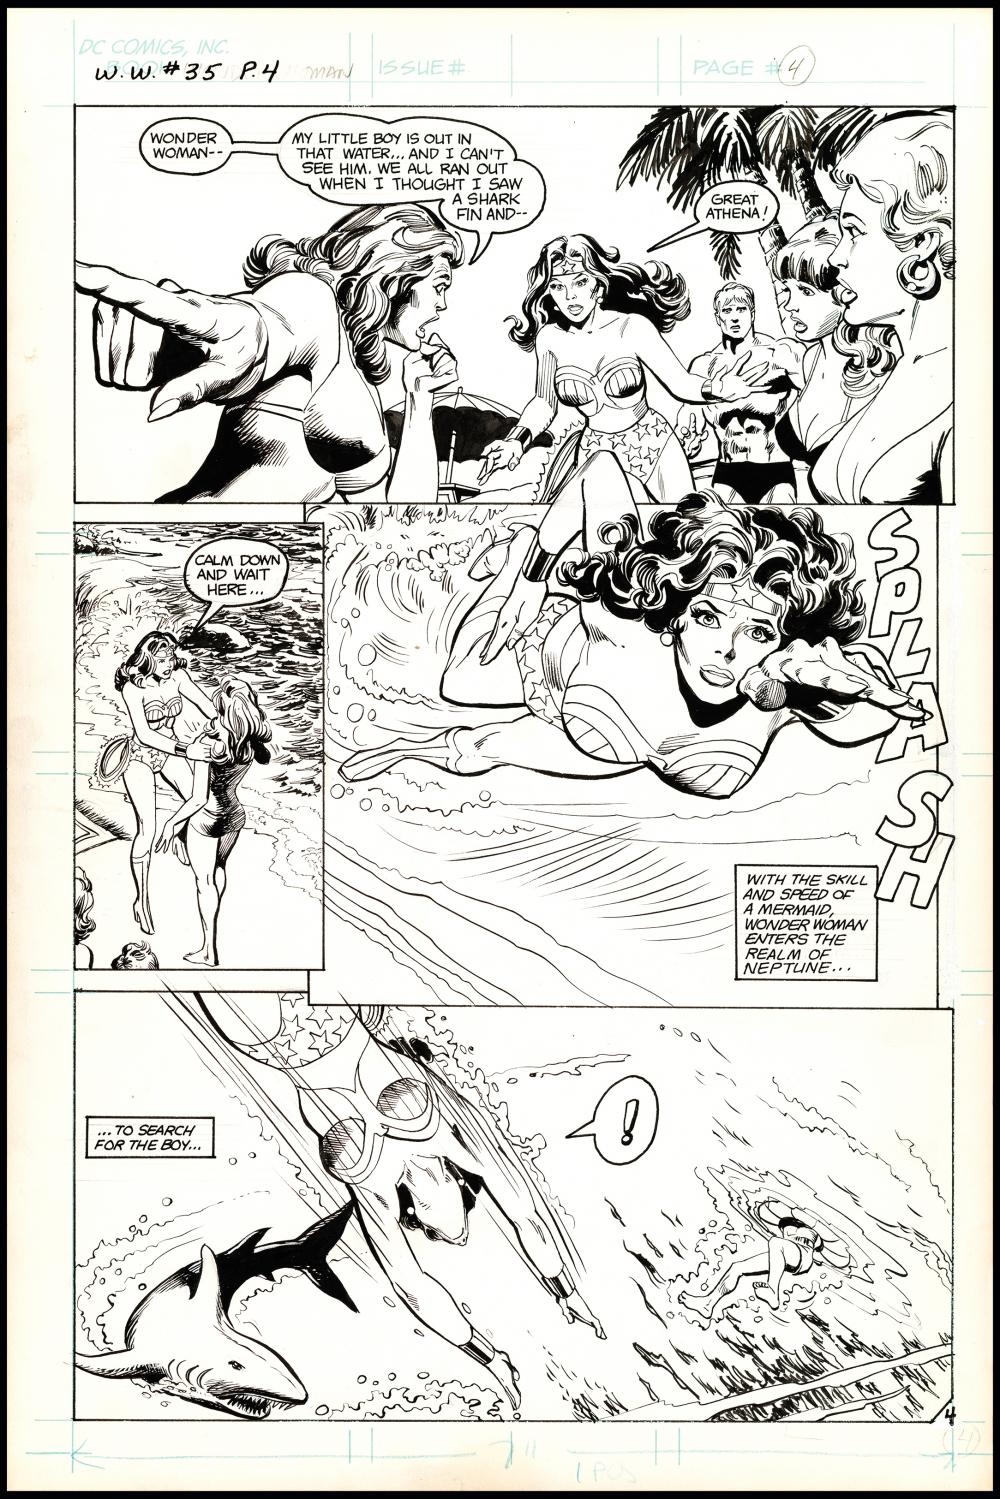 Image: Wonder Woman The Secret of the Magic Tiara book and record set #35 art by Rich Buckler